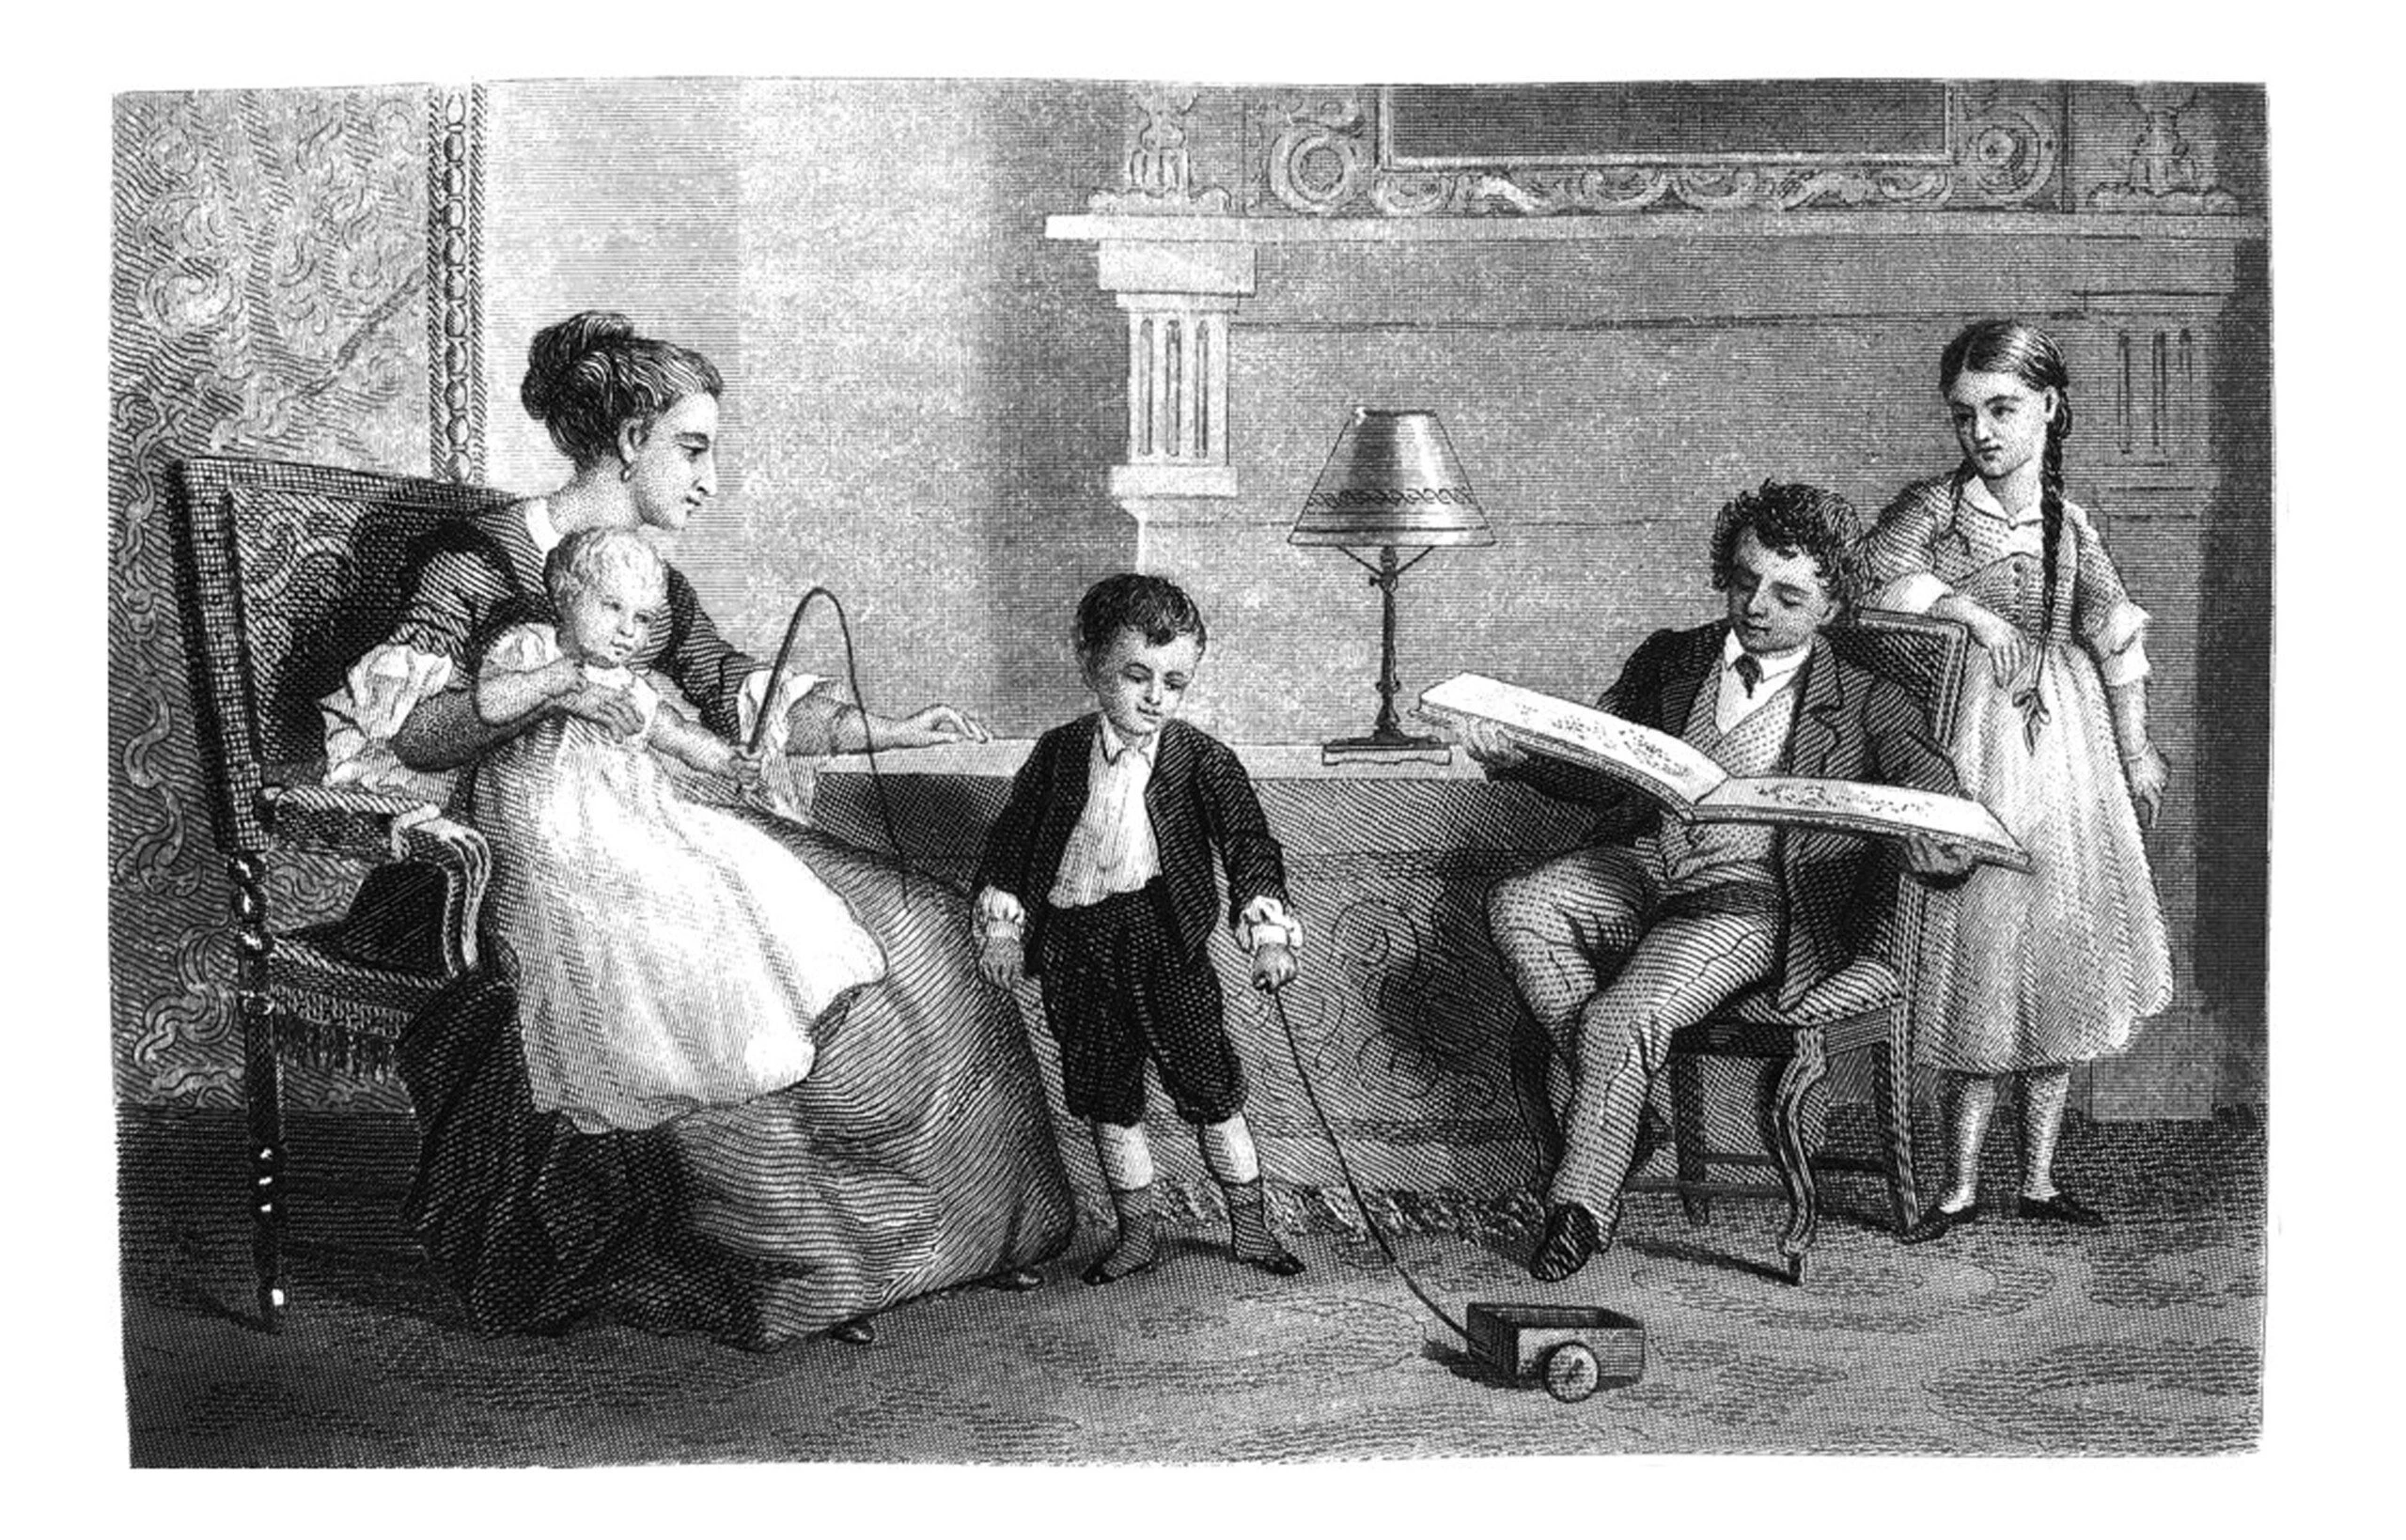 First Century United States illustrations - 1873 - A family at home - parents and children